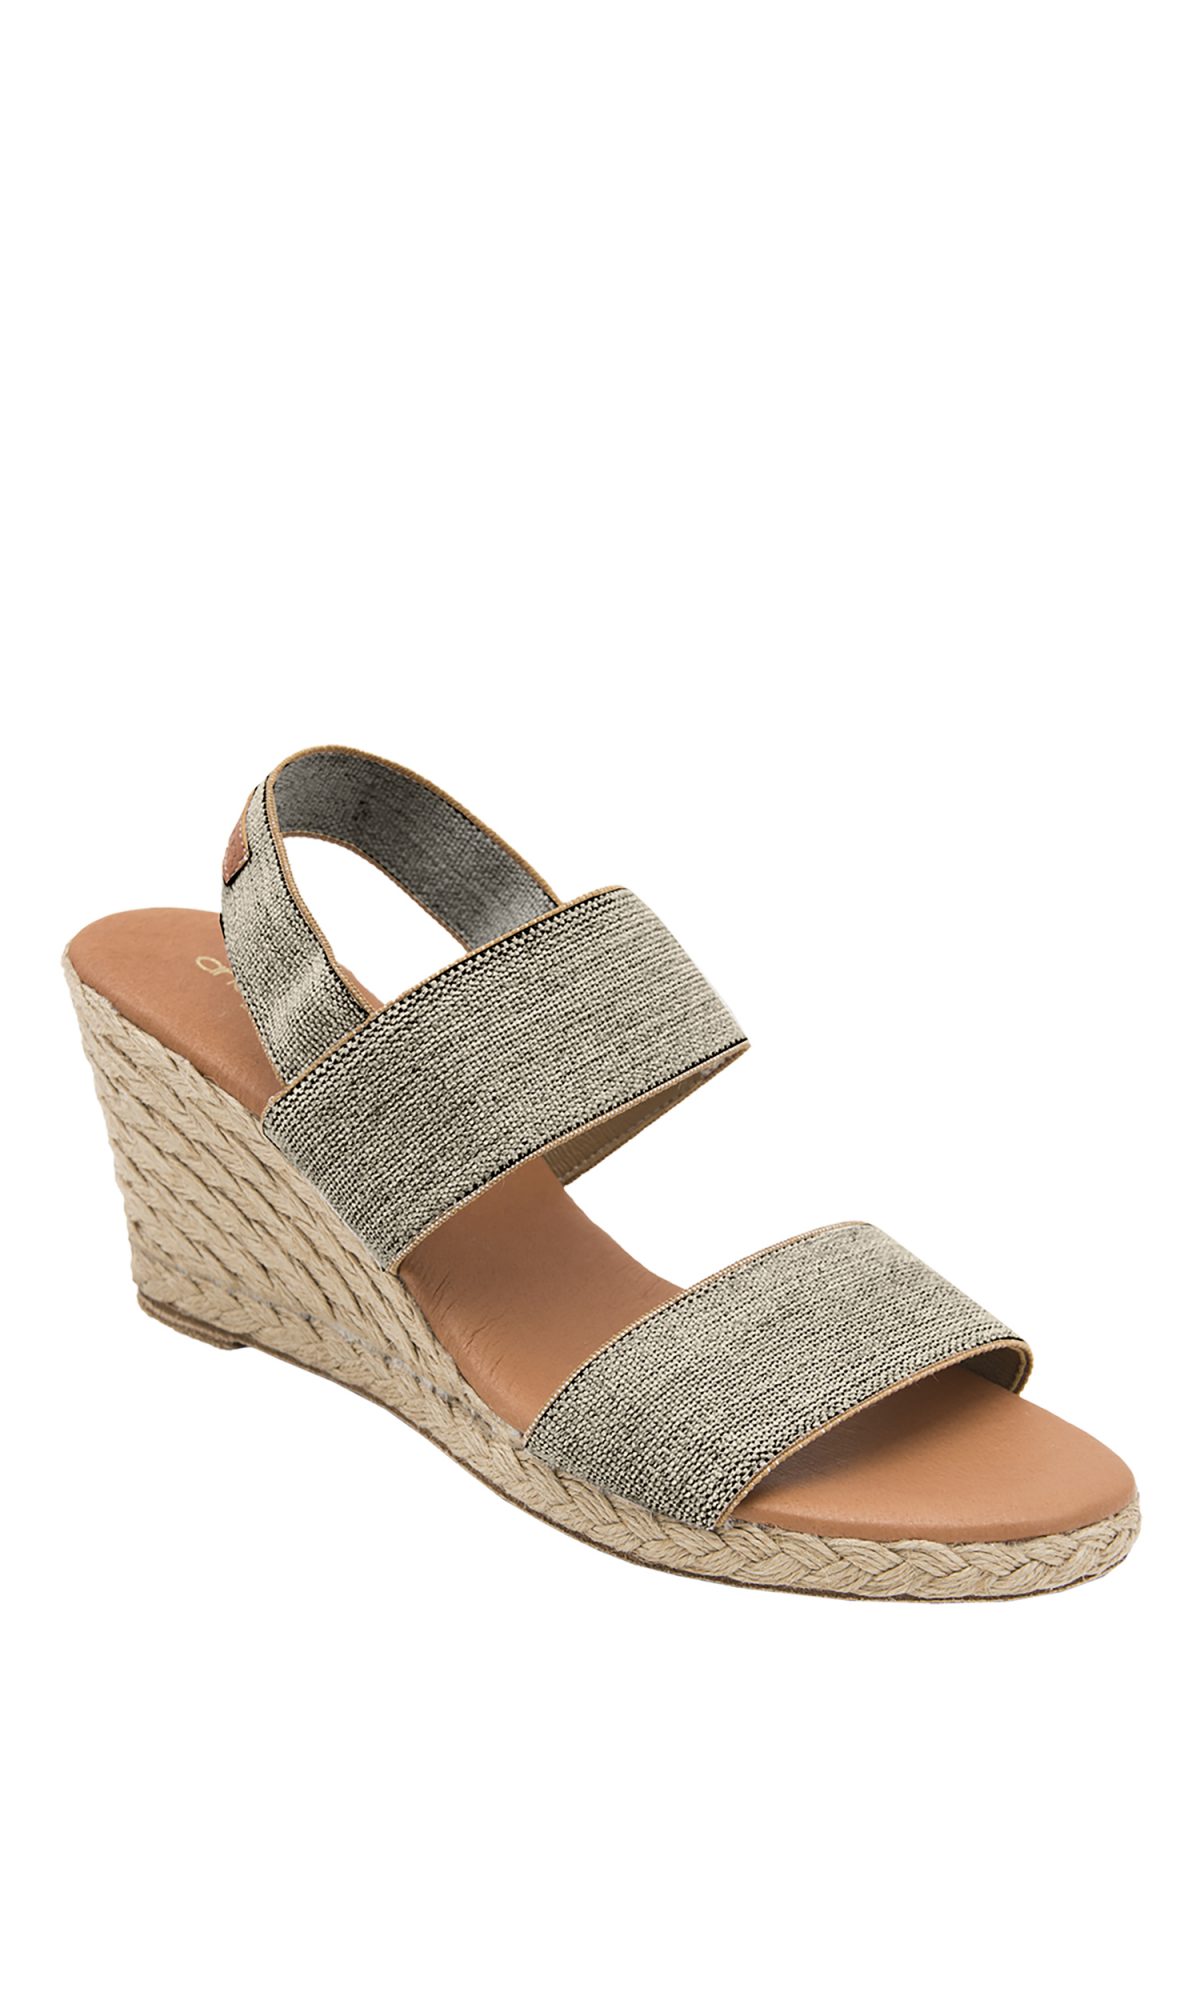 Andre Assou Allison Espadrille Wedge with Elastic Band with Backstrap| Ooh Ooh Shoes woman's clothing & shoe boutique naples, charleston and mashpee